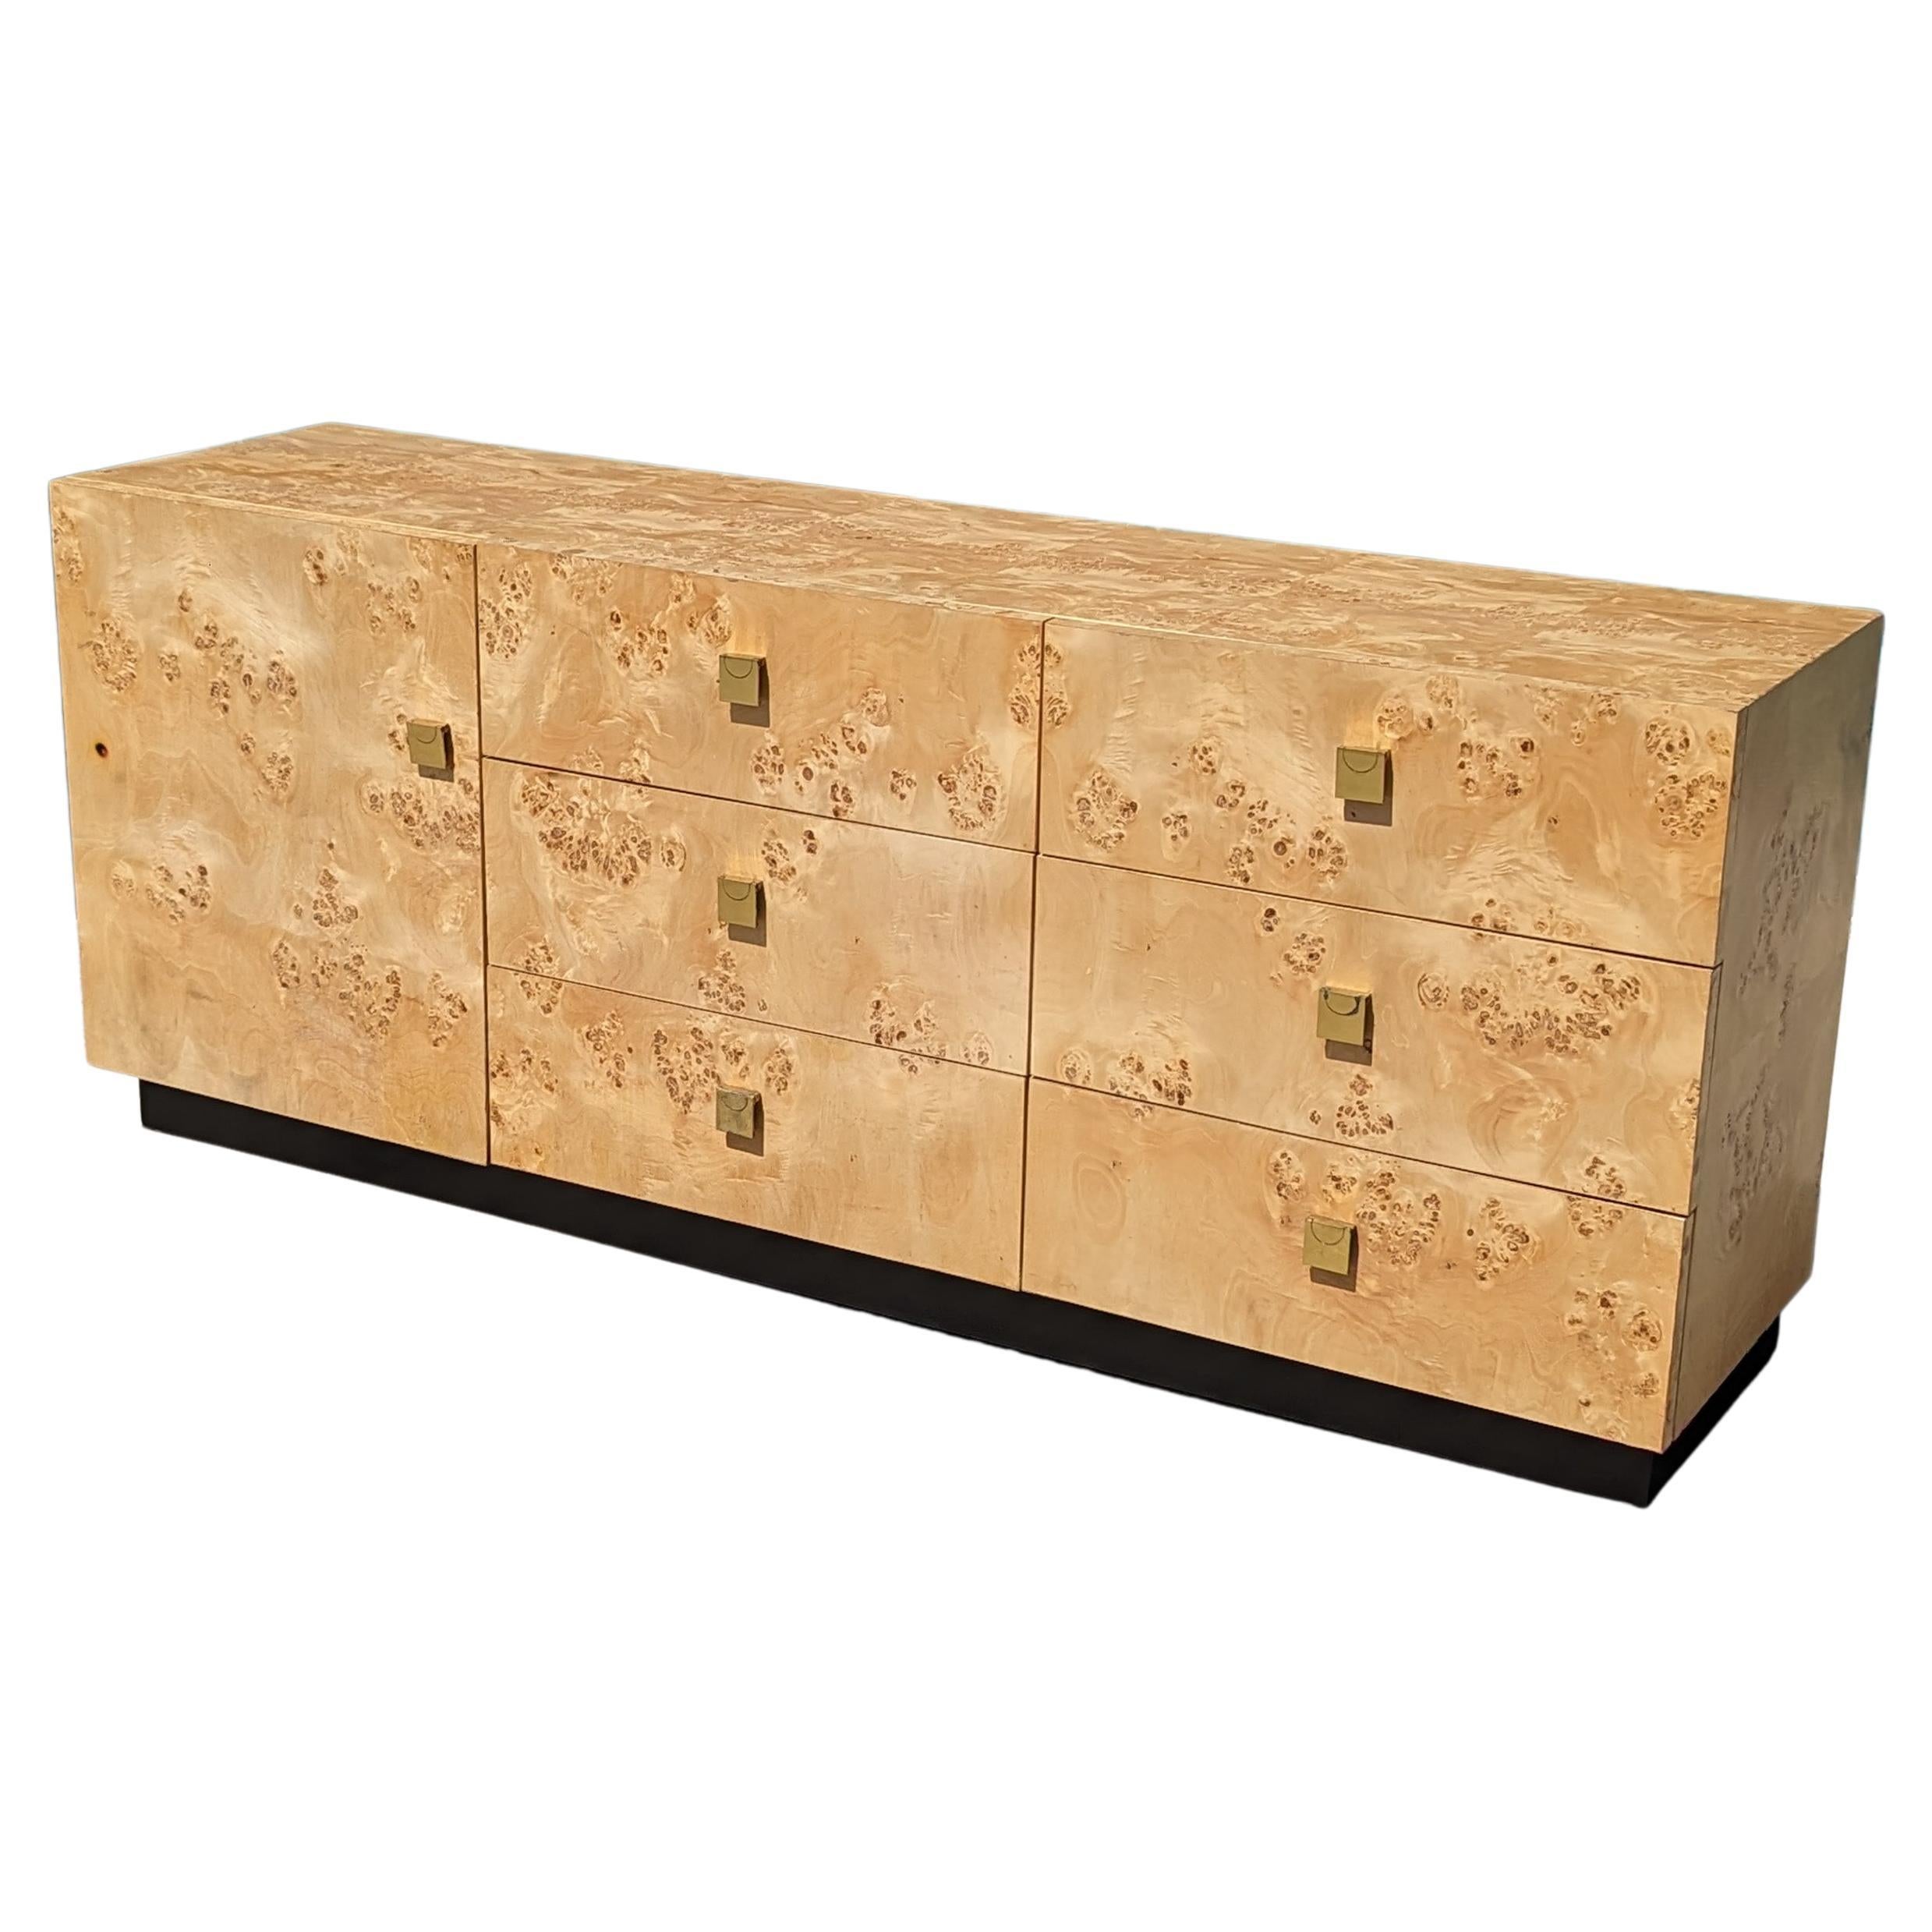 Vintage Burlwood and Brass Credenza by Founders